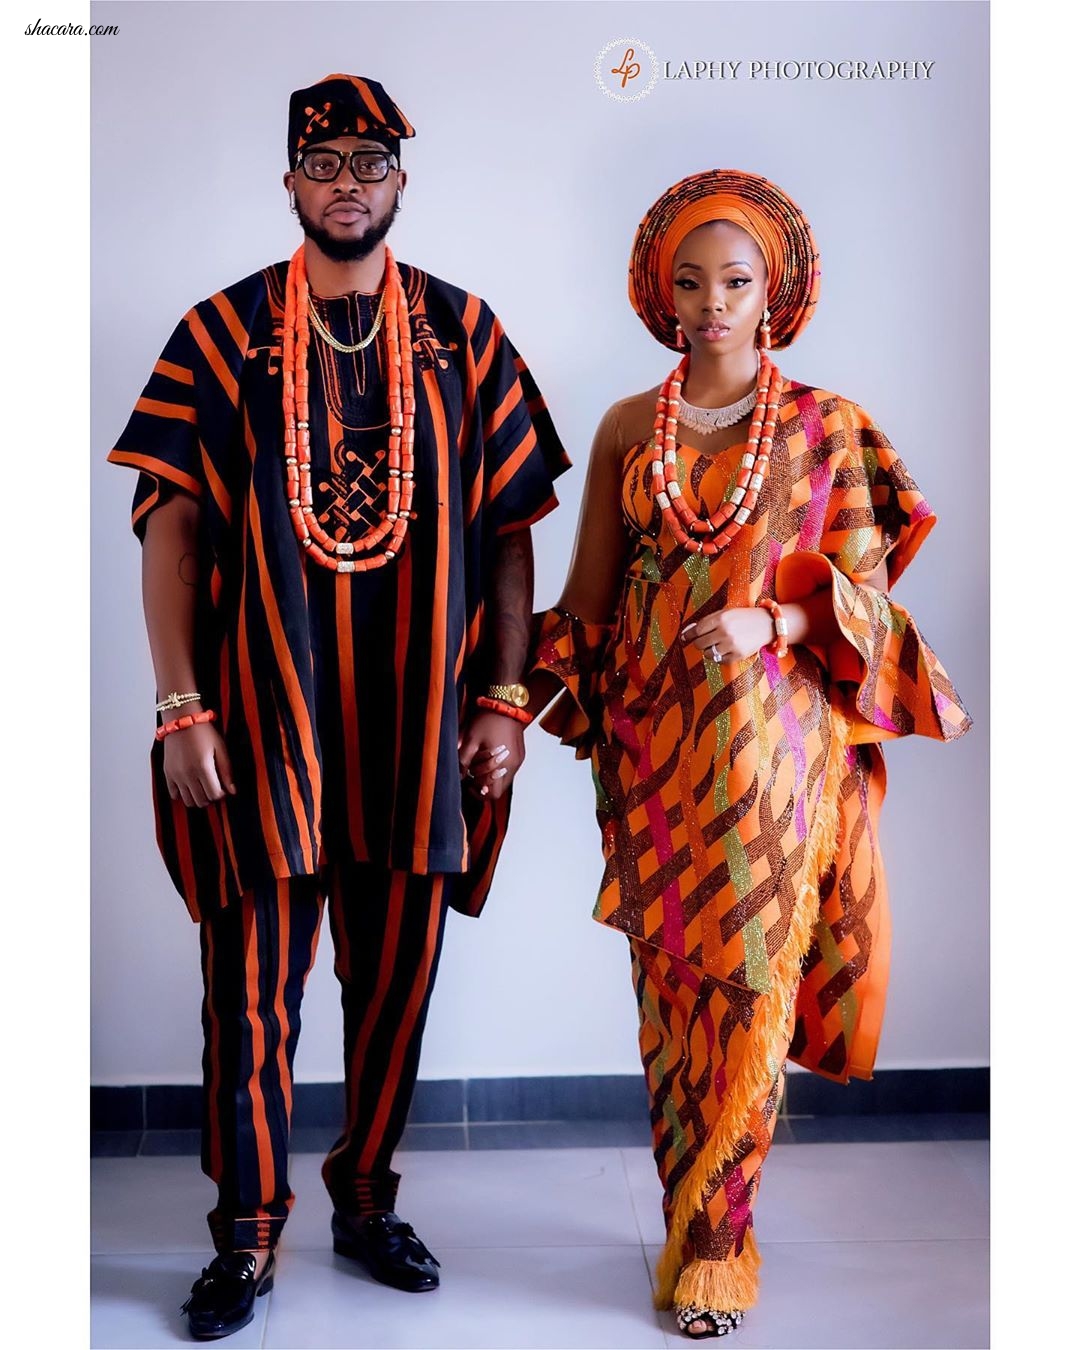 It’s All About Love Today! Here are the First Photos from BamBam & Teddy A’s Intro/Engagement | #BamTeddy